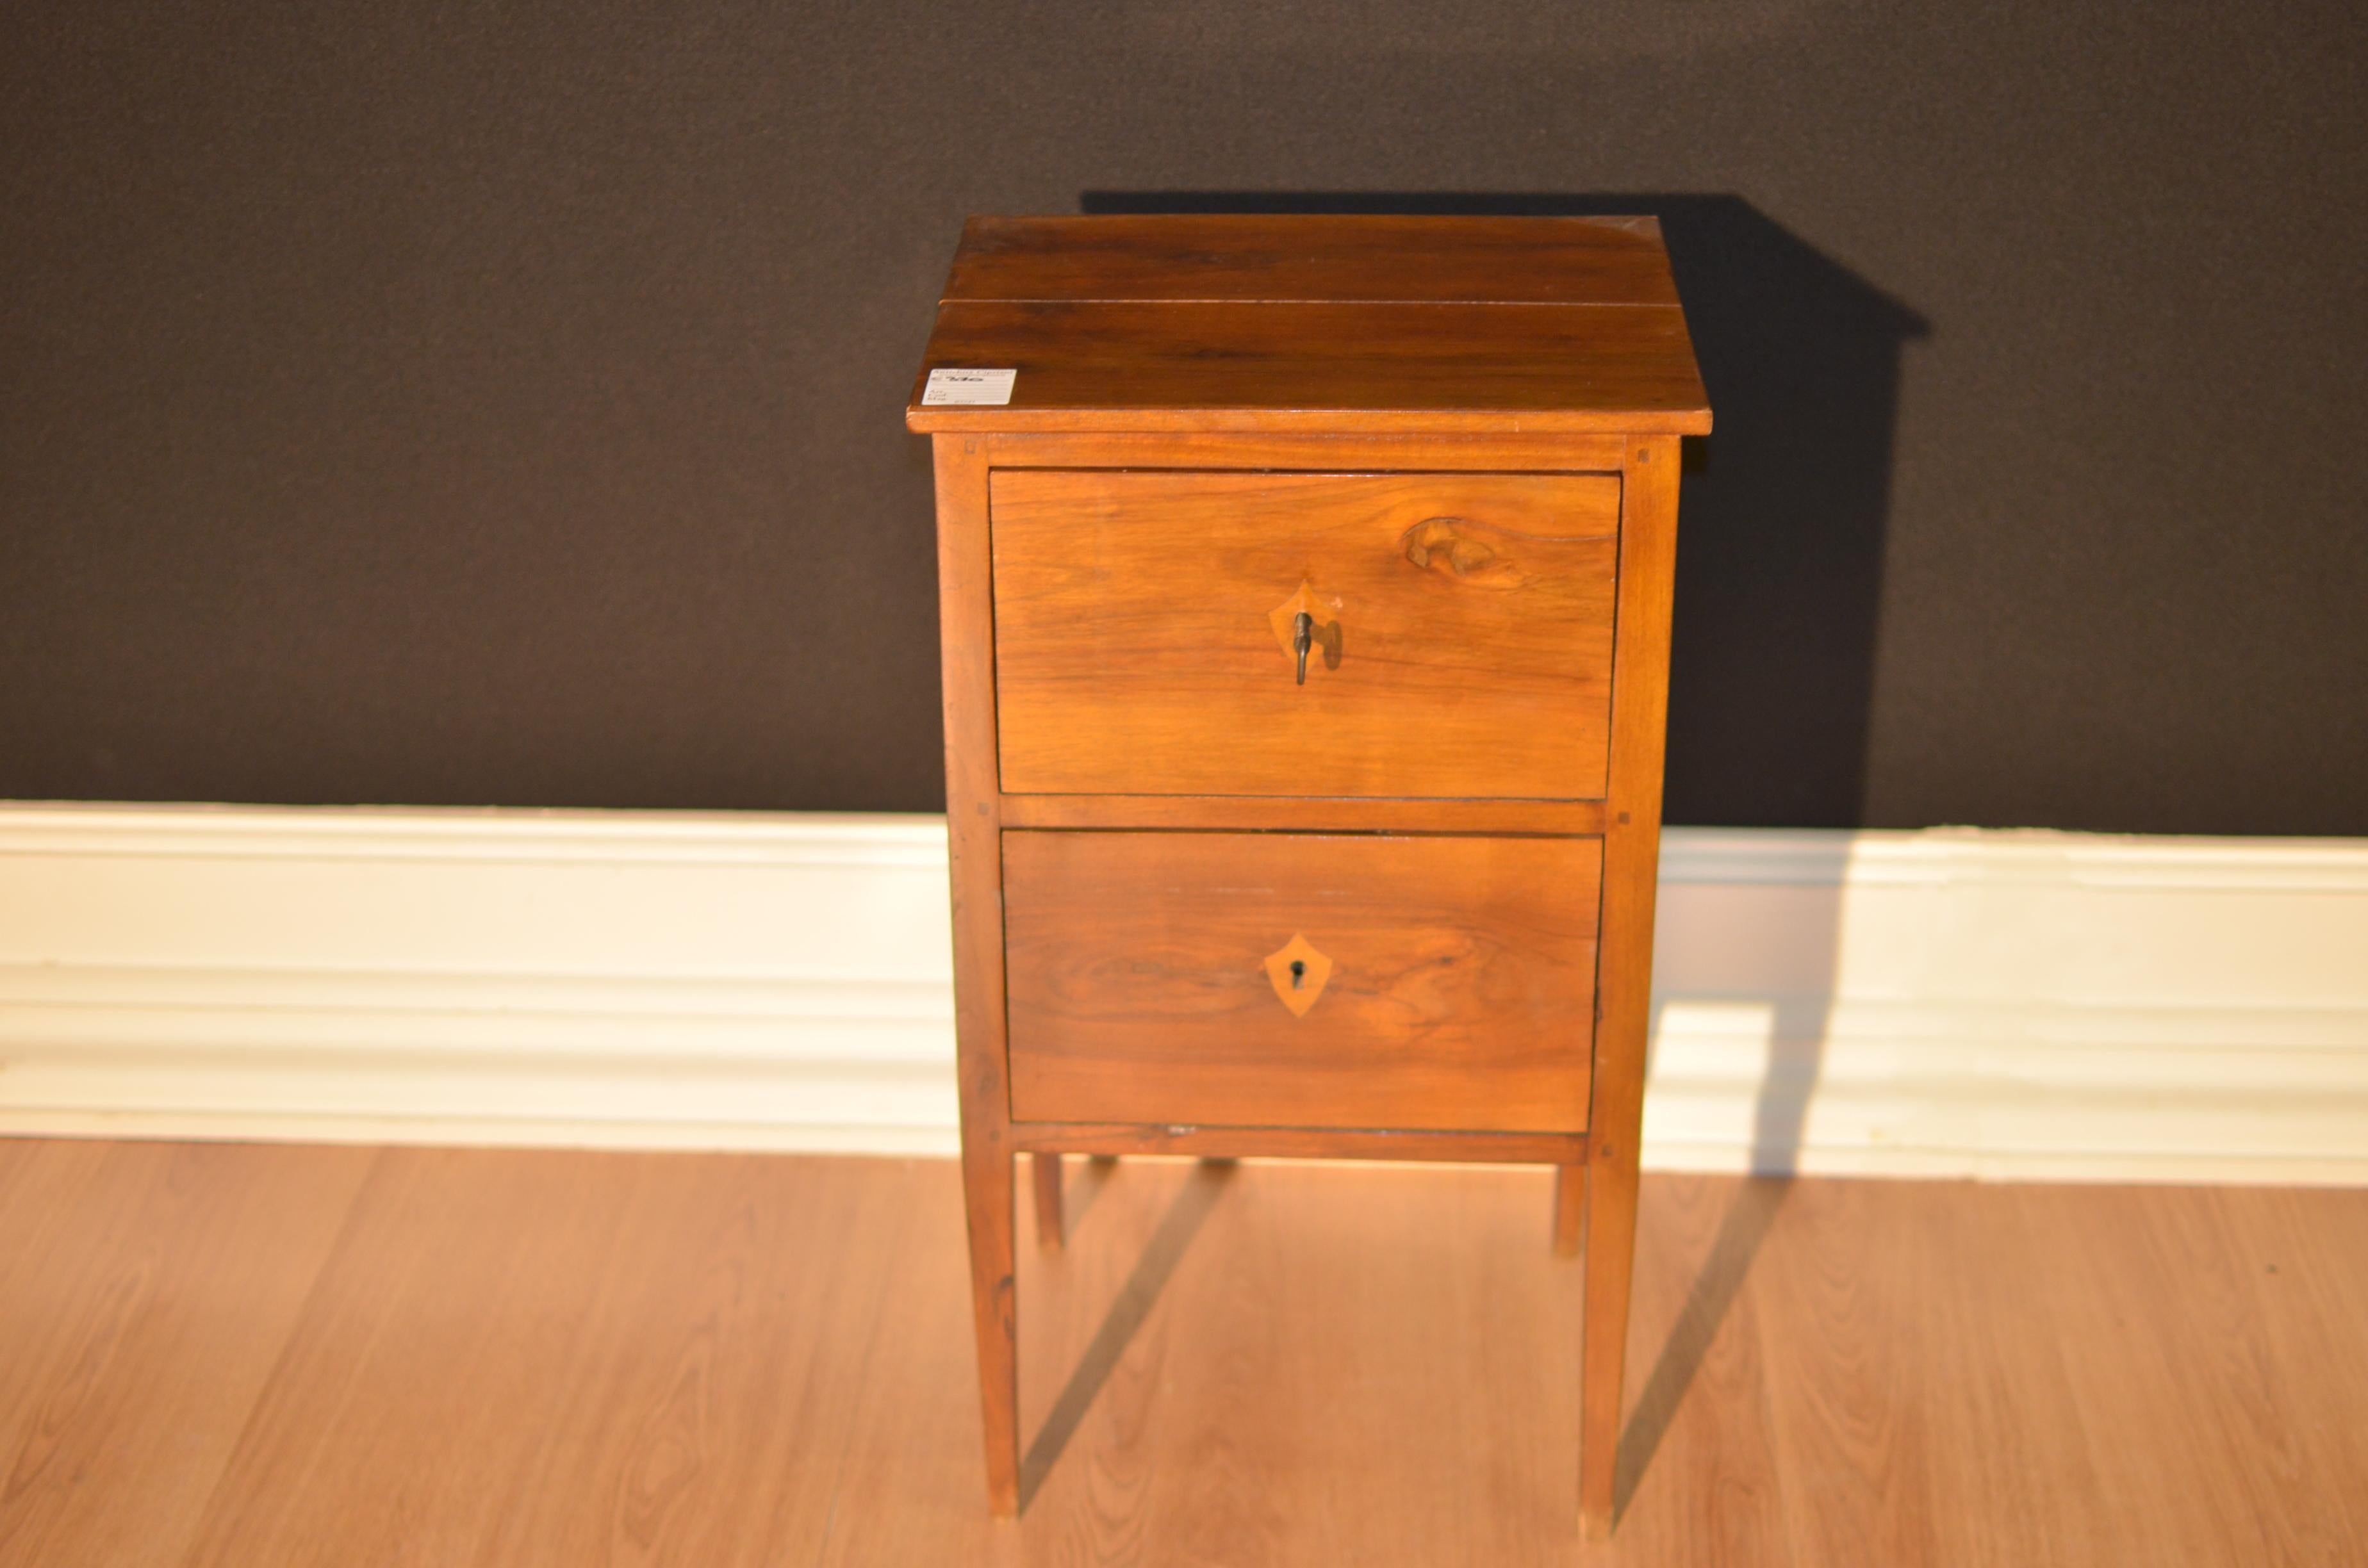 Louis XVI bedside table in walnut of French origin from circa 1810. The bedside table has two large drawers, locks and original keys. The bedside table has been completely restored and polished with lacquer rubber.